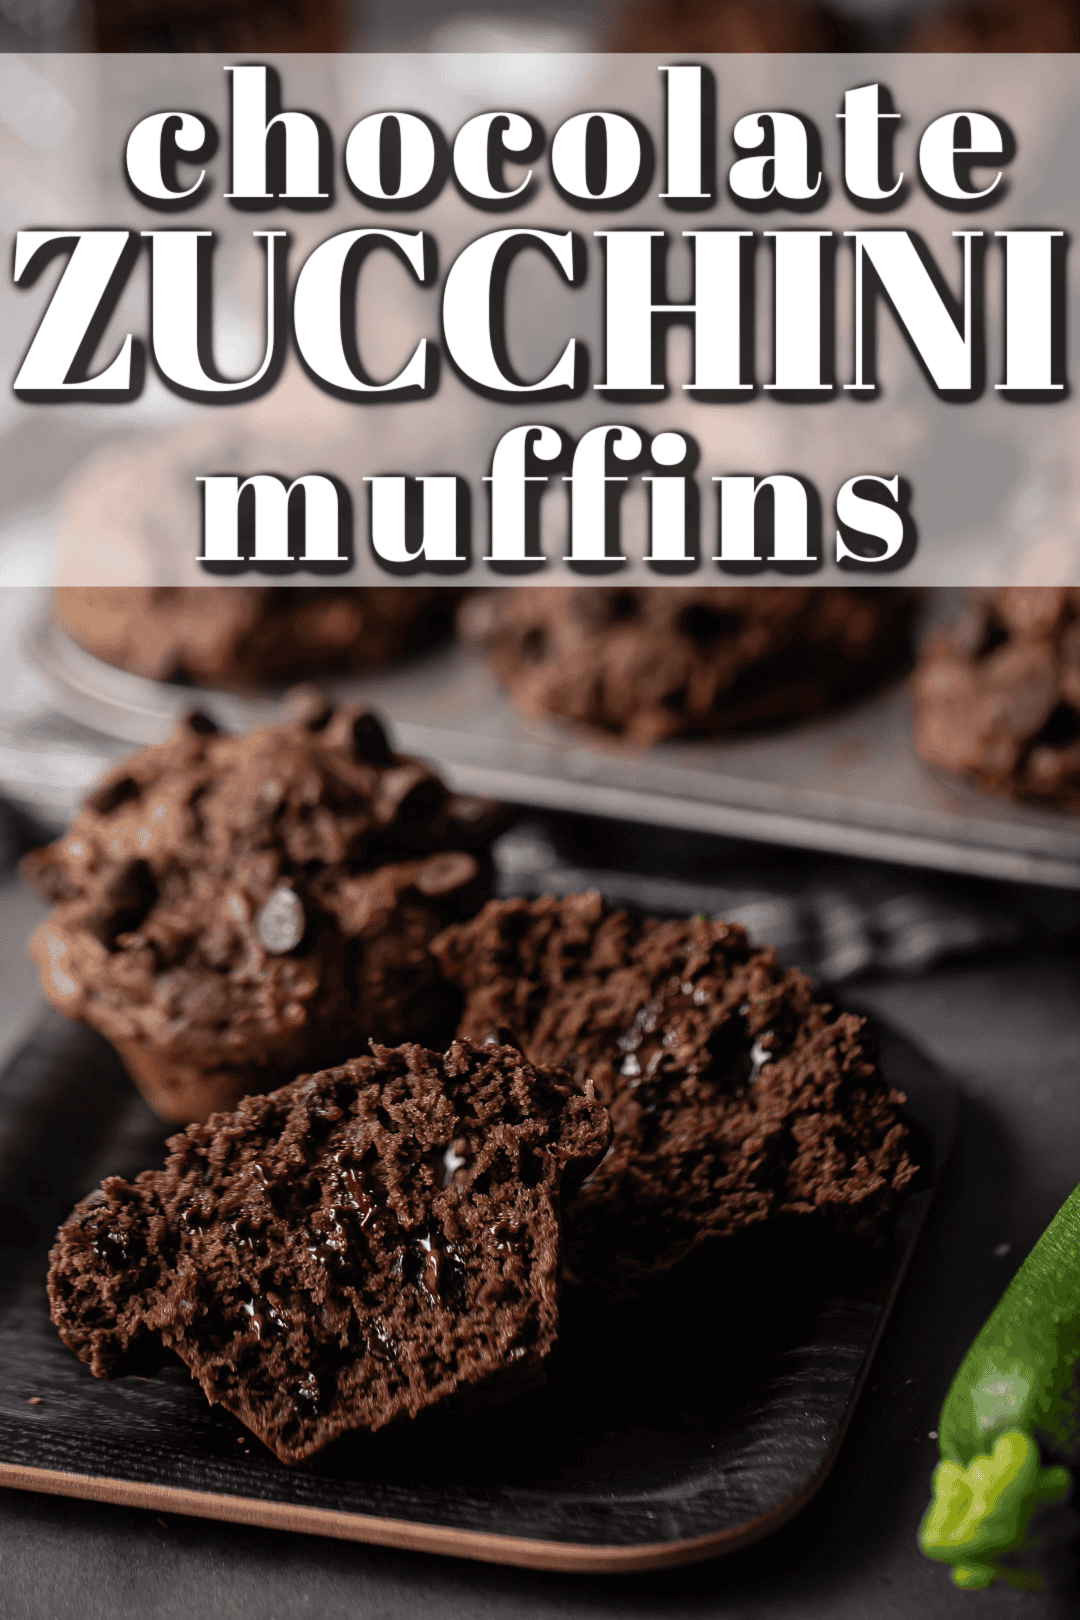 Two chocolate zucchini muffins on a dark plate, one of them split in half to display the melty chocolate chips.